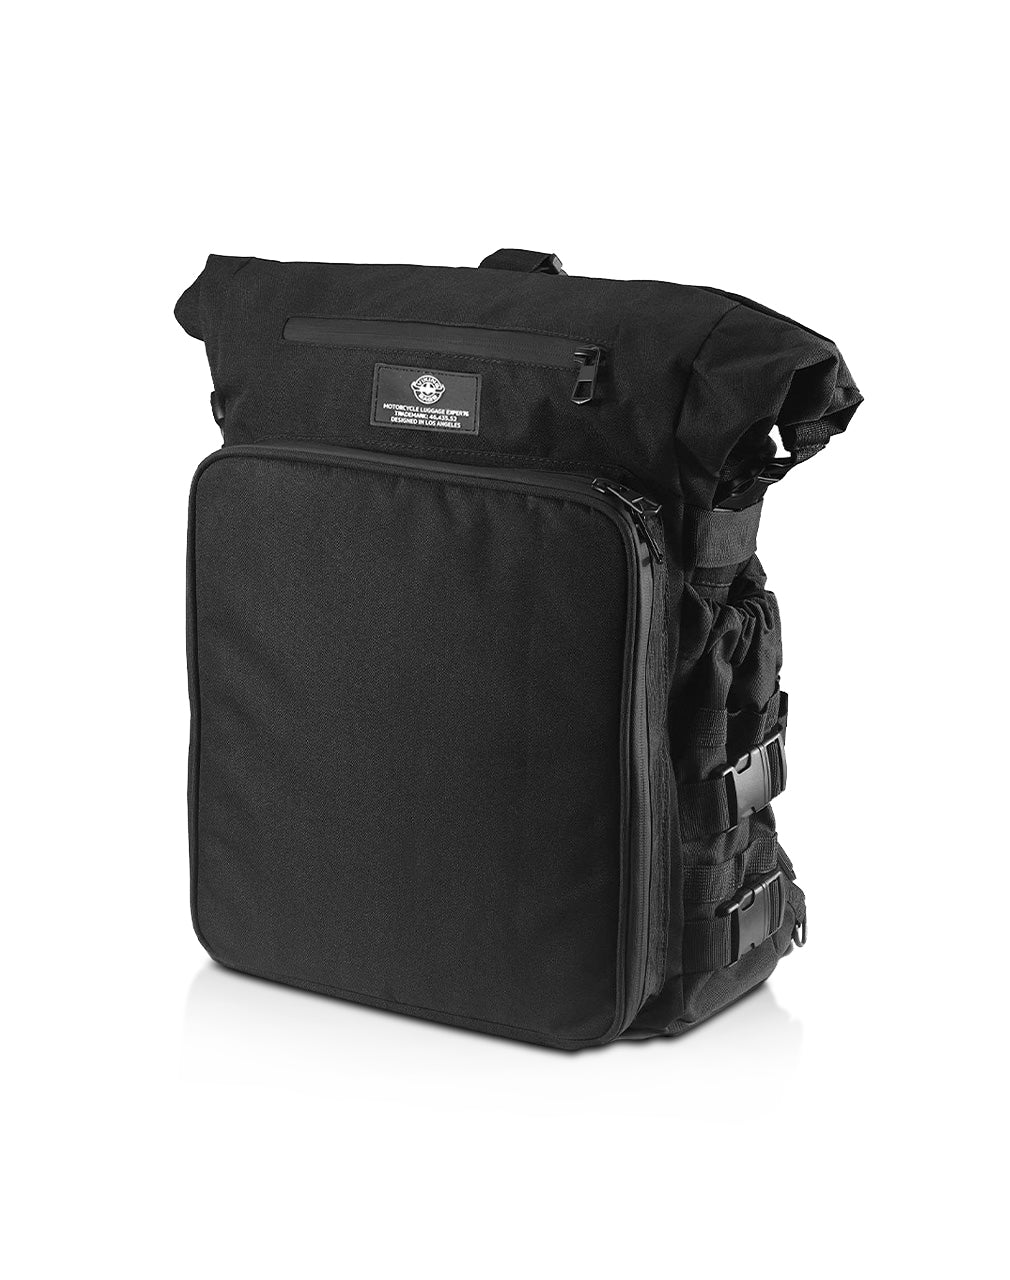 32L - Renegade XL Victory Motorcycle Tail Bag